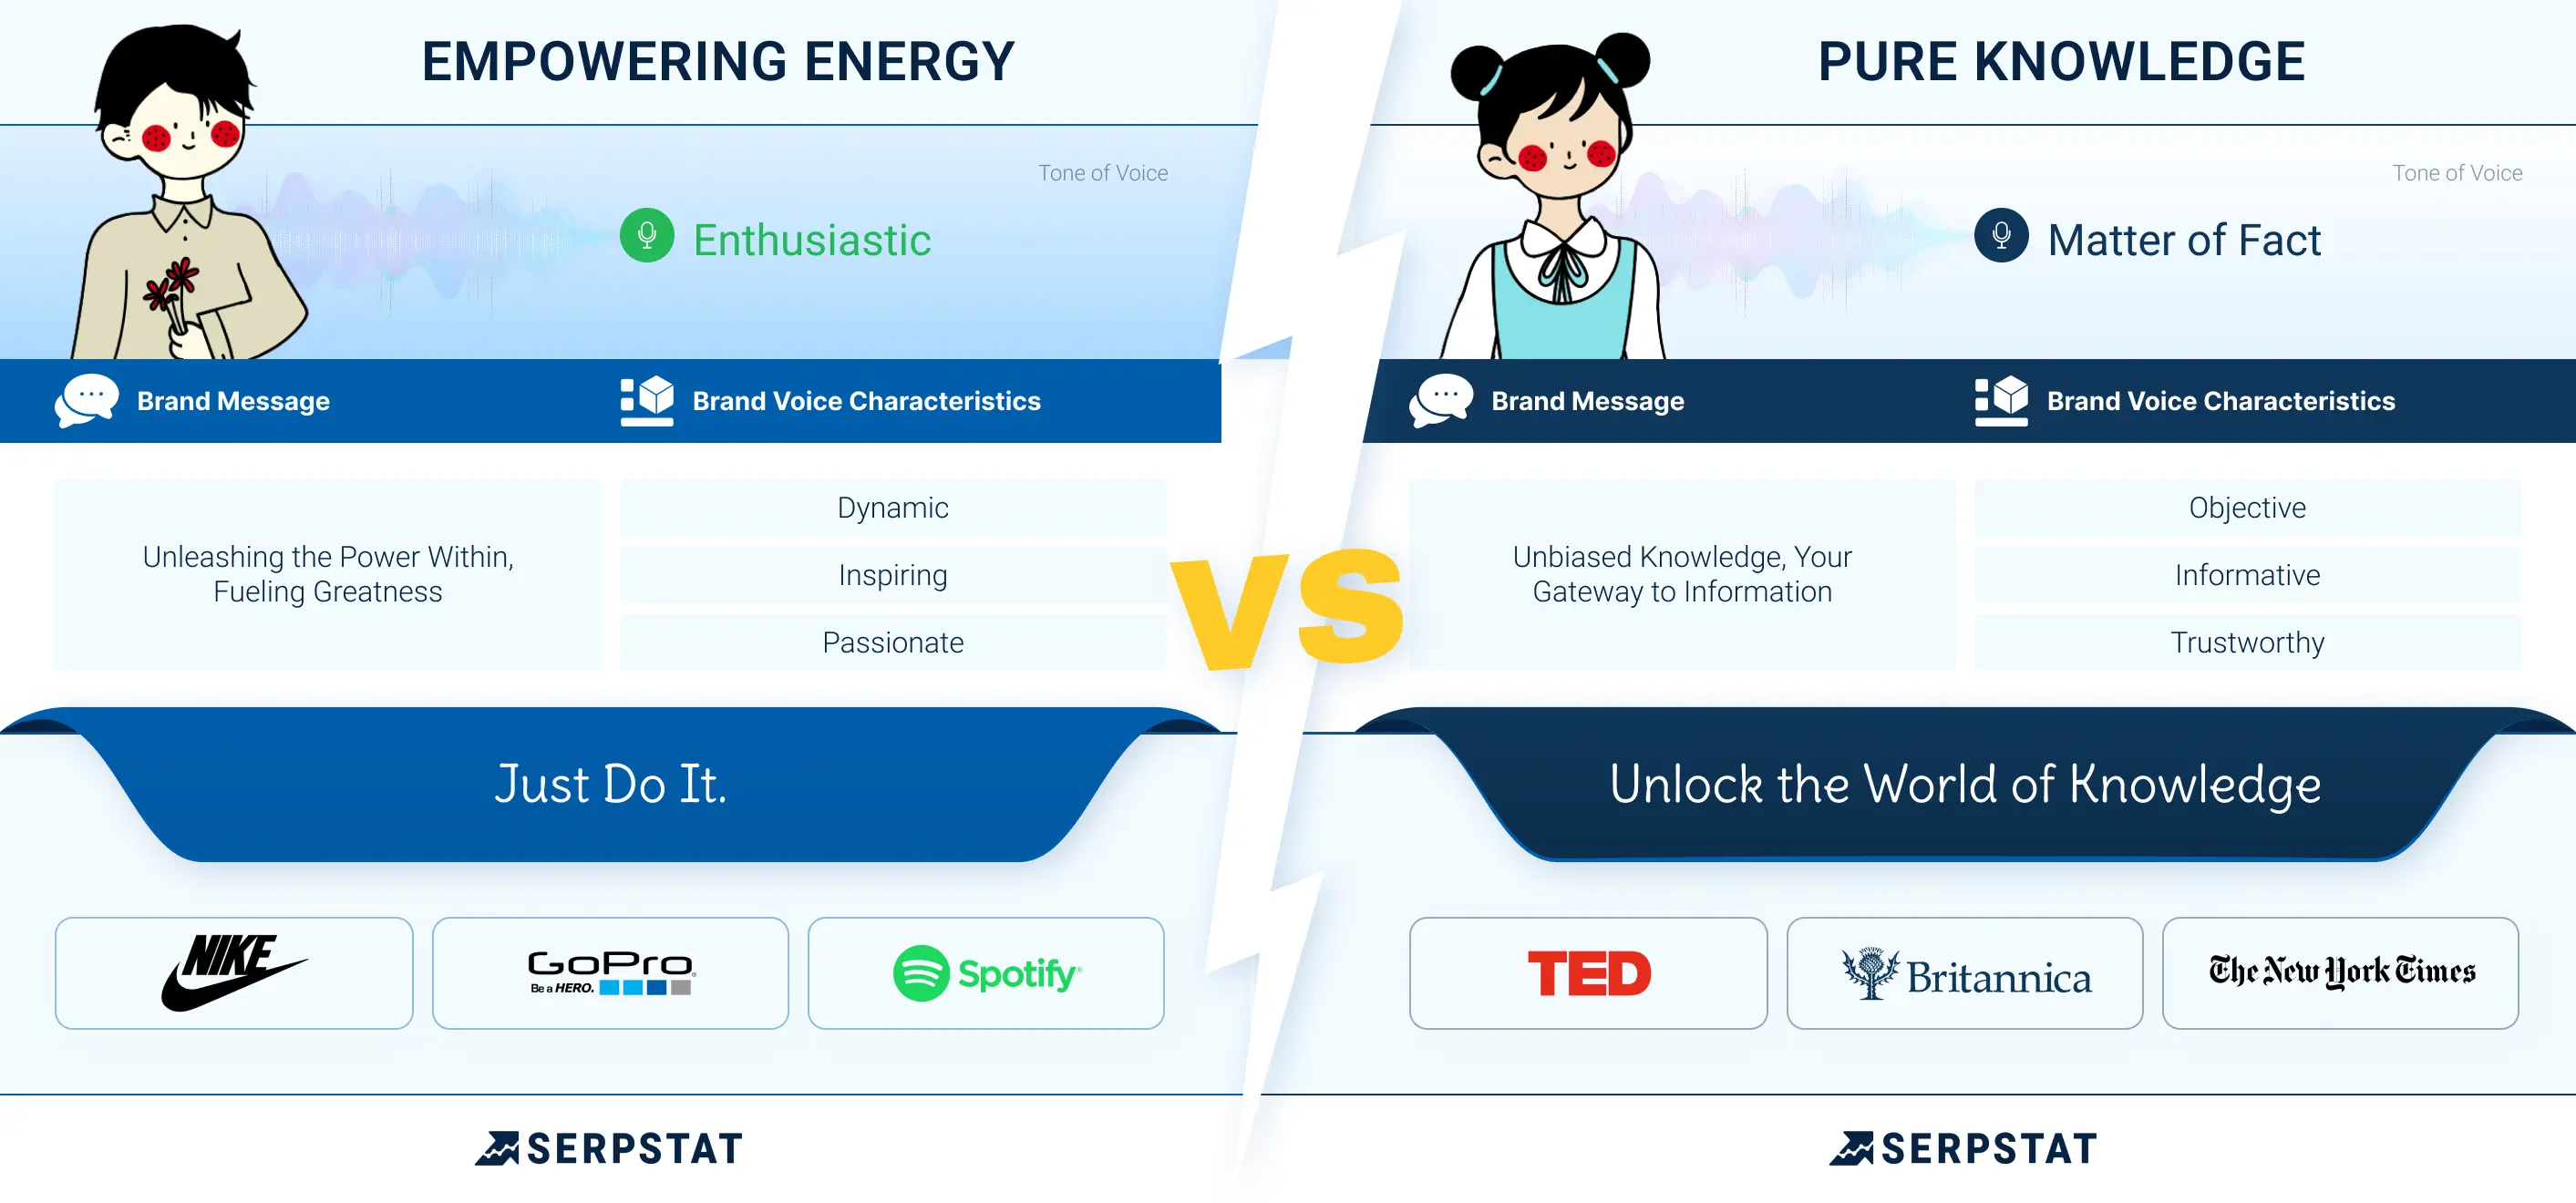 Enthusiastic vs. Matter of Fact